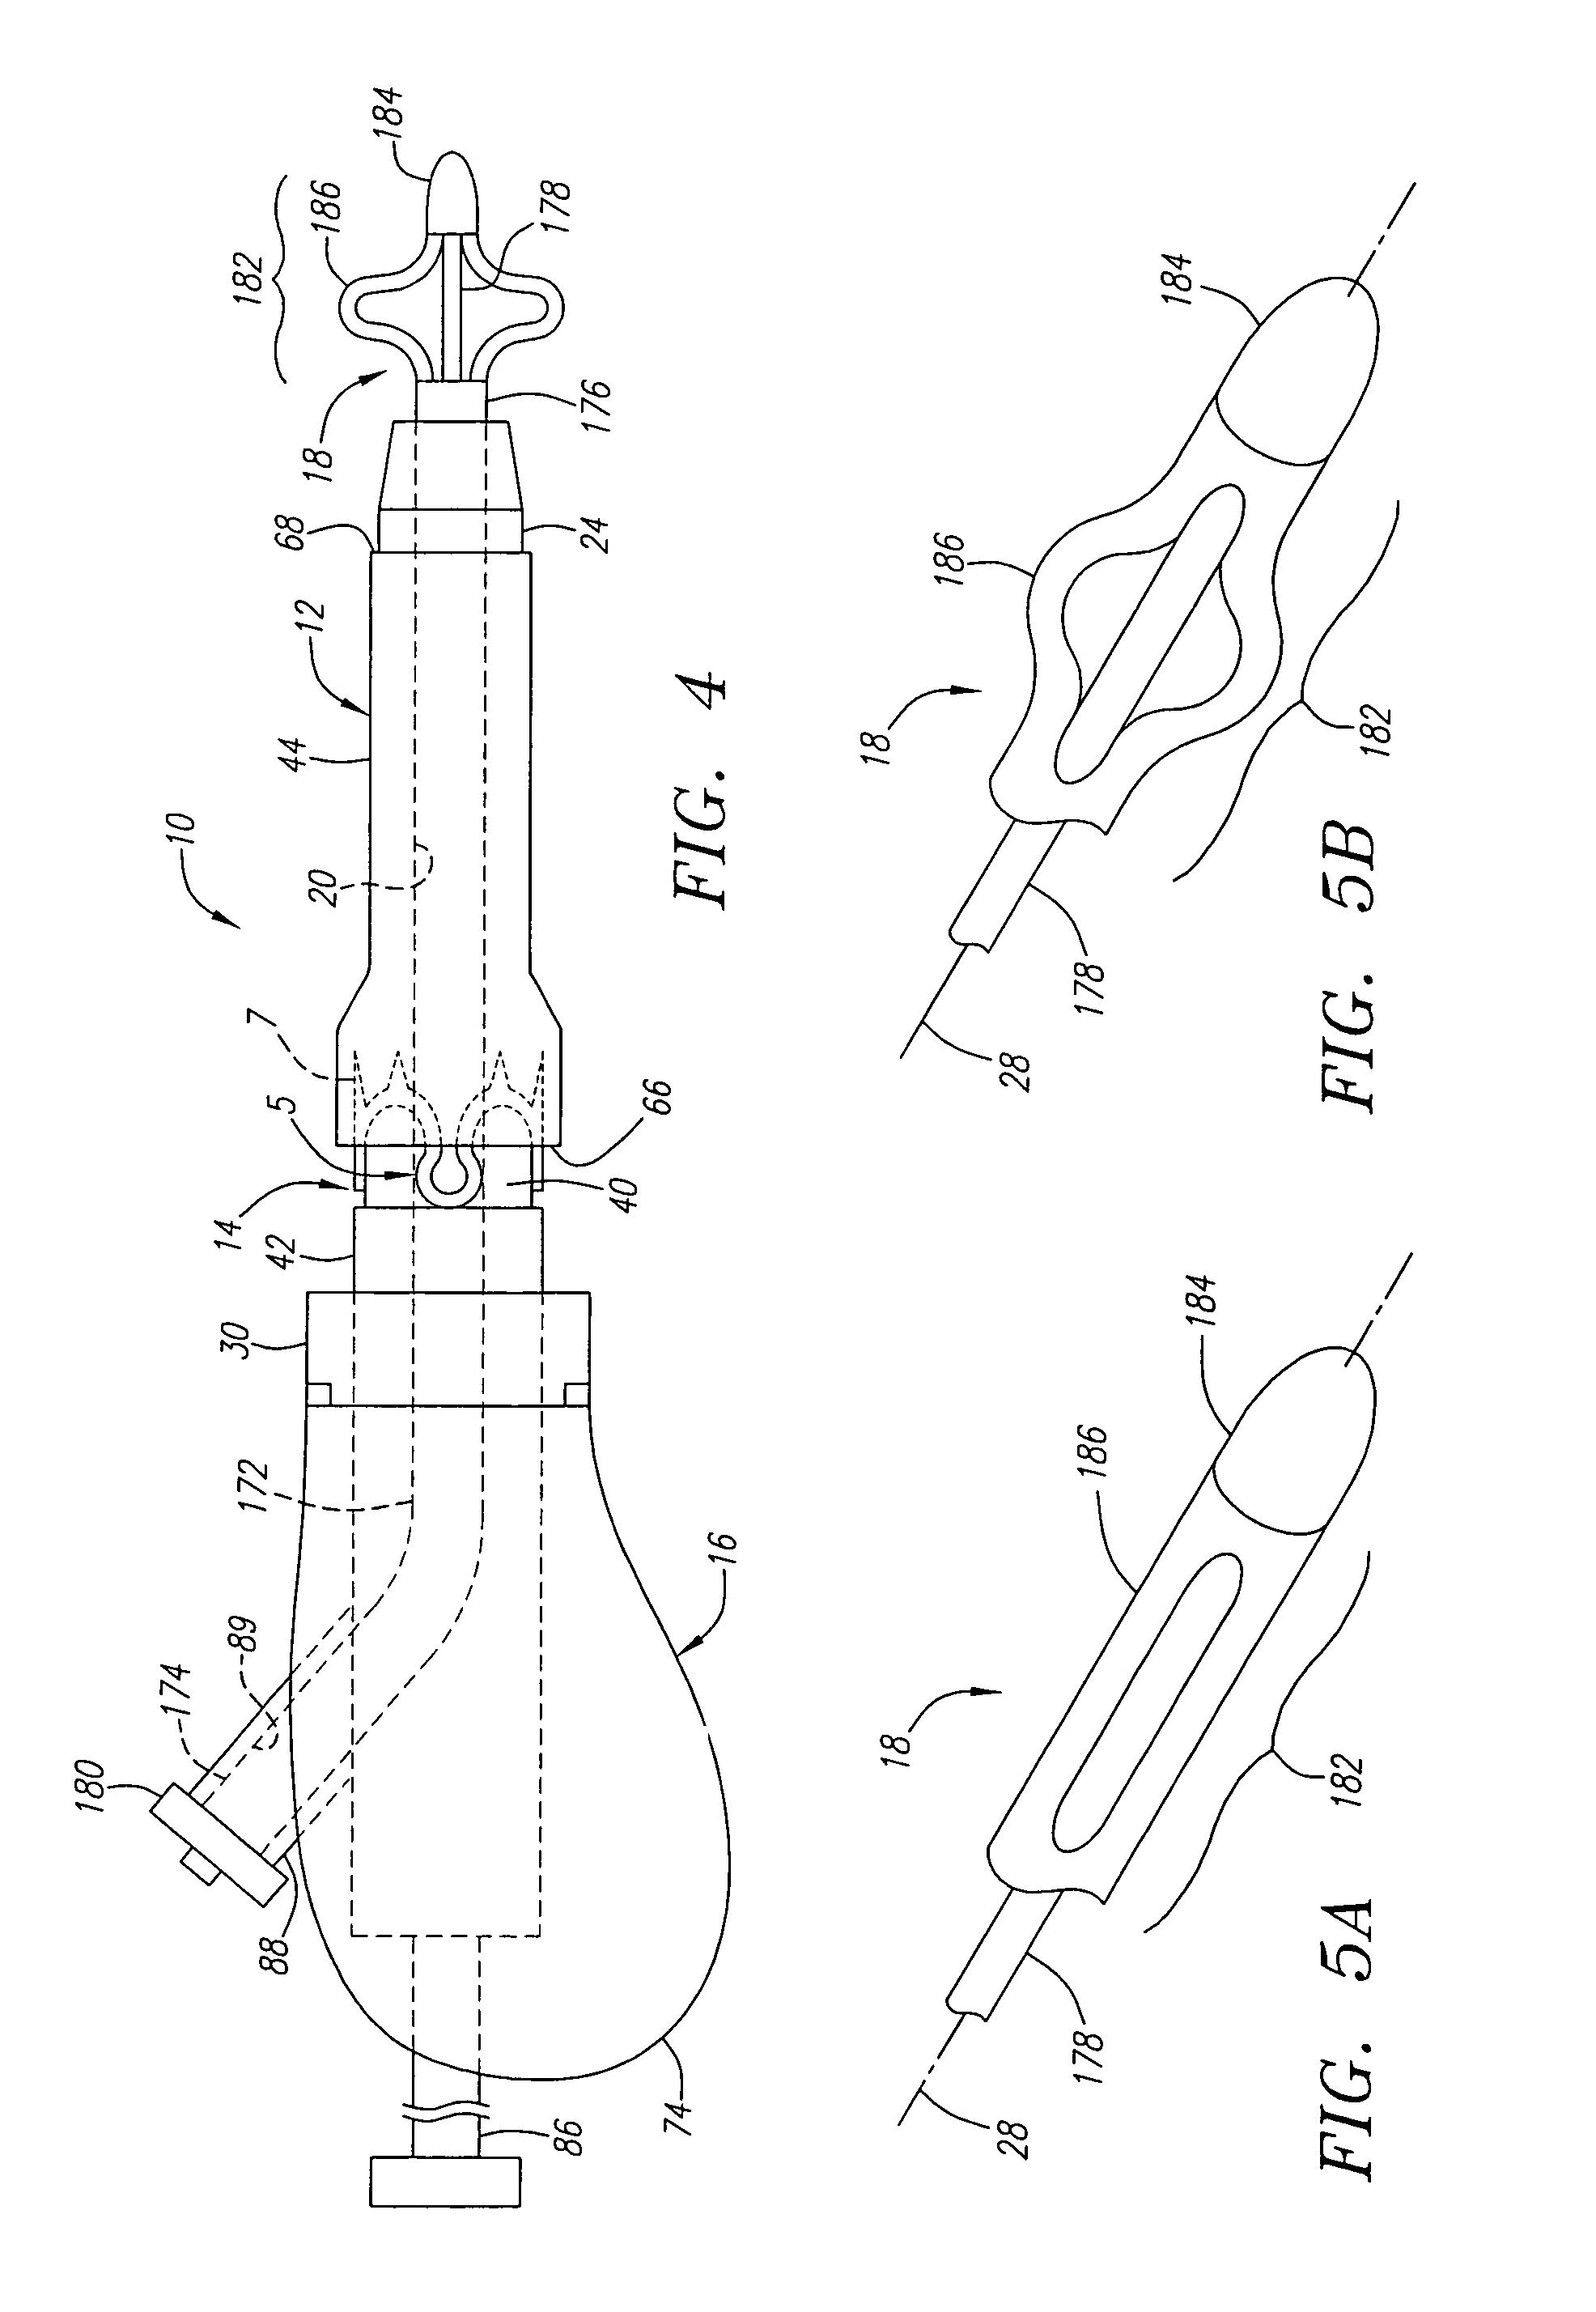 Plunger apparatus and methods for delivering a closure device